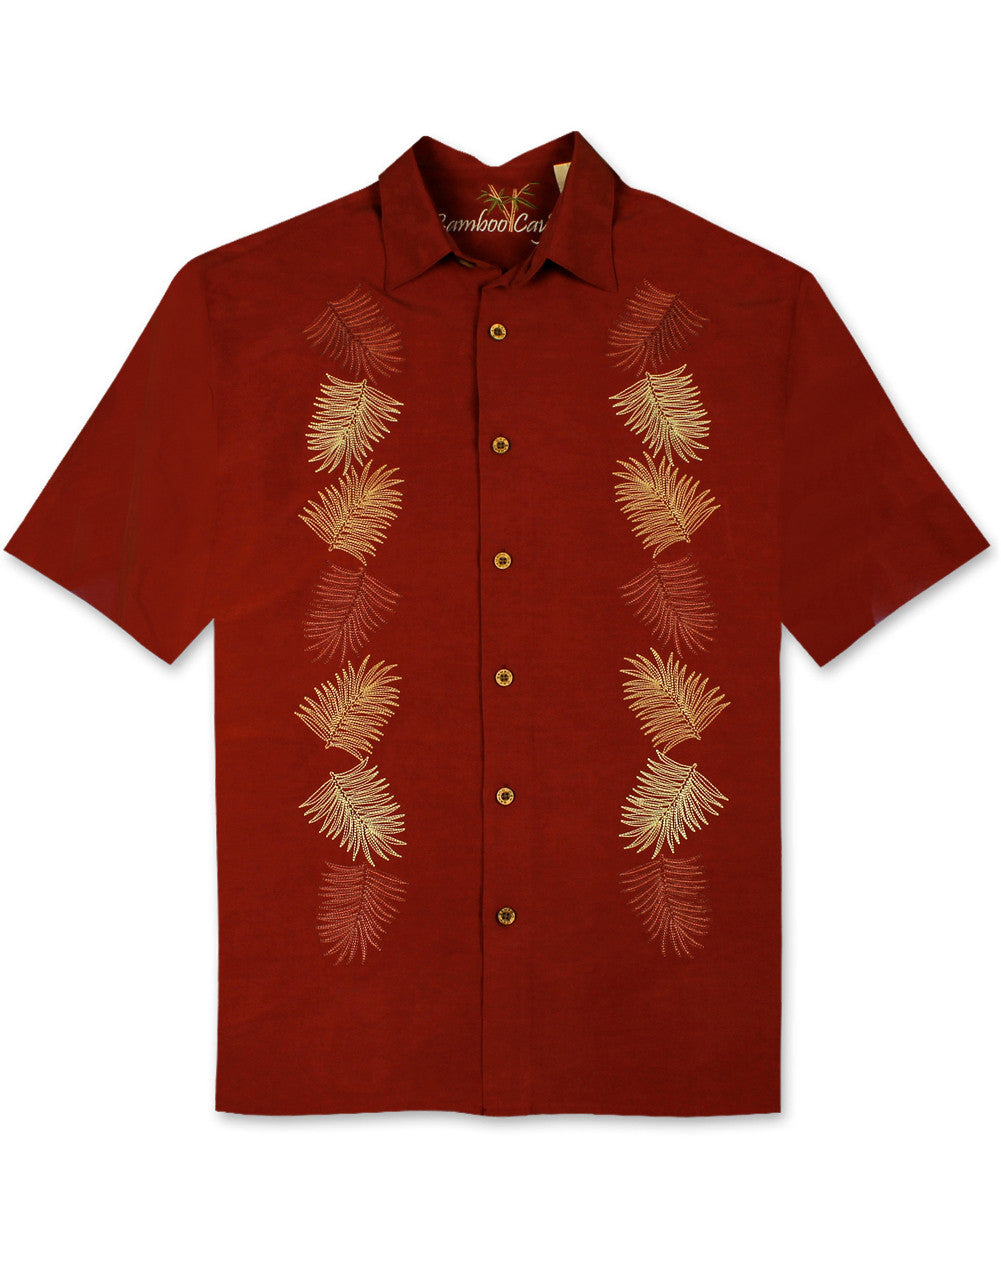 Vertical Salamanca Embroidered Polynosic Camp Shirt by Bamboo Cay